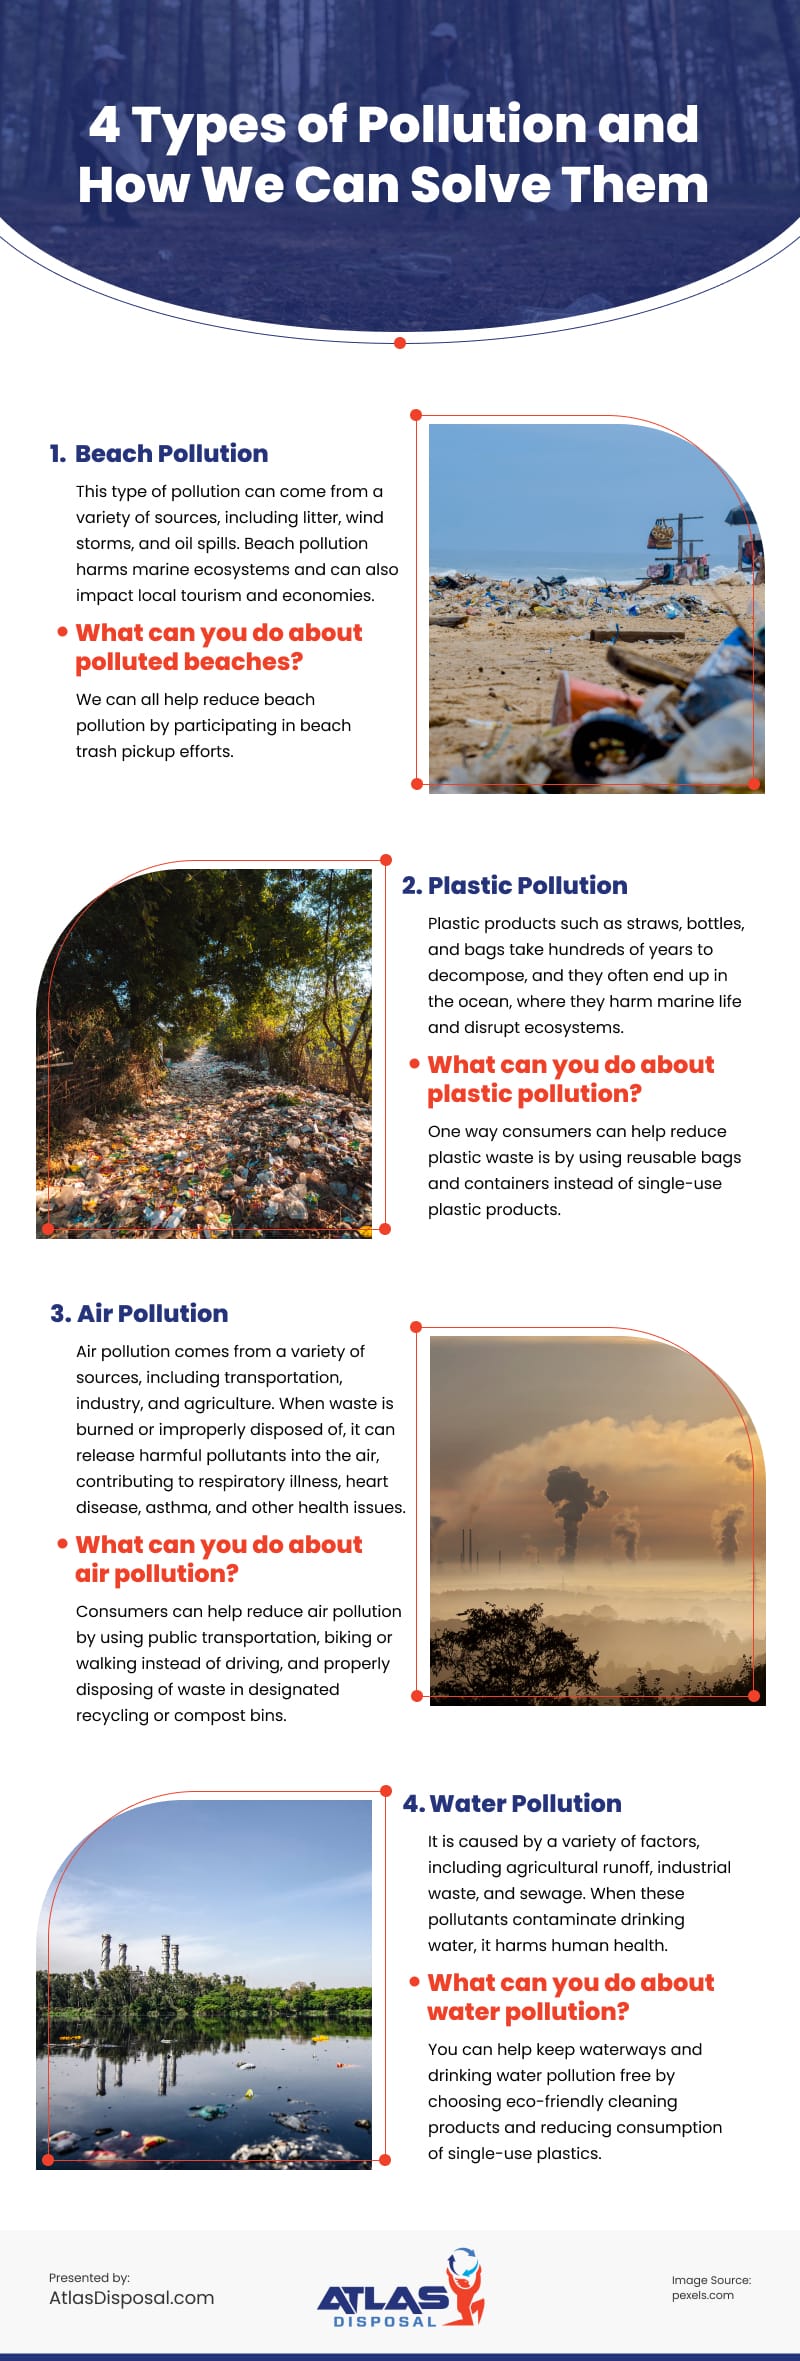 4 Types of Pollution and How We Can Solve Them Infographic